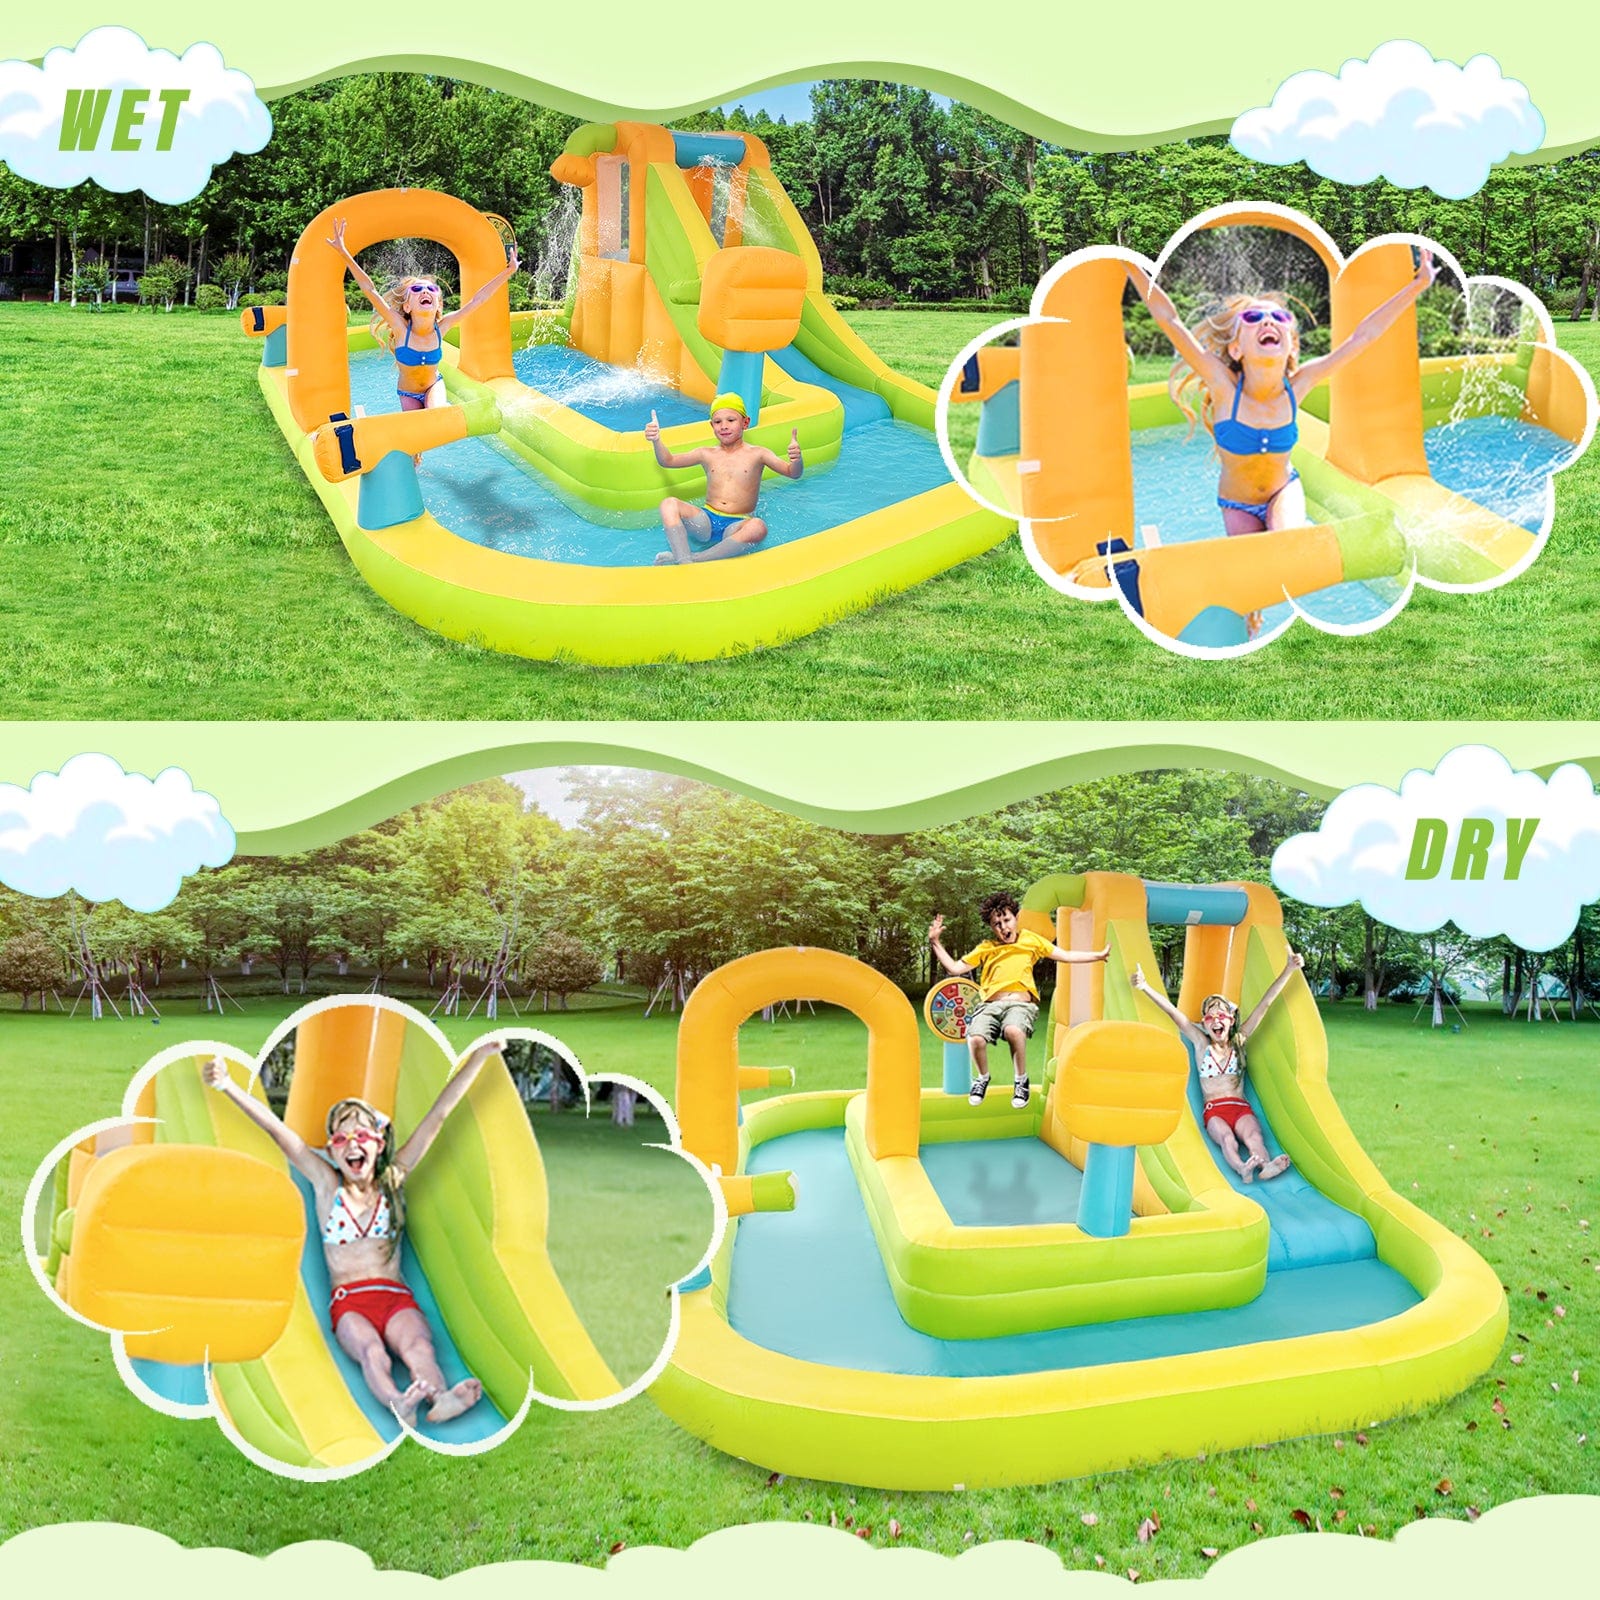 AKSPORT Inflatable Bounce House with Water Slide 8 - IN - 1 - AKSPORT